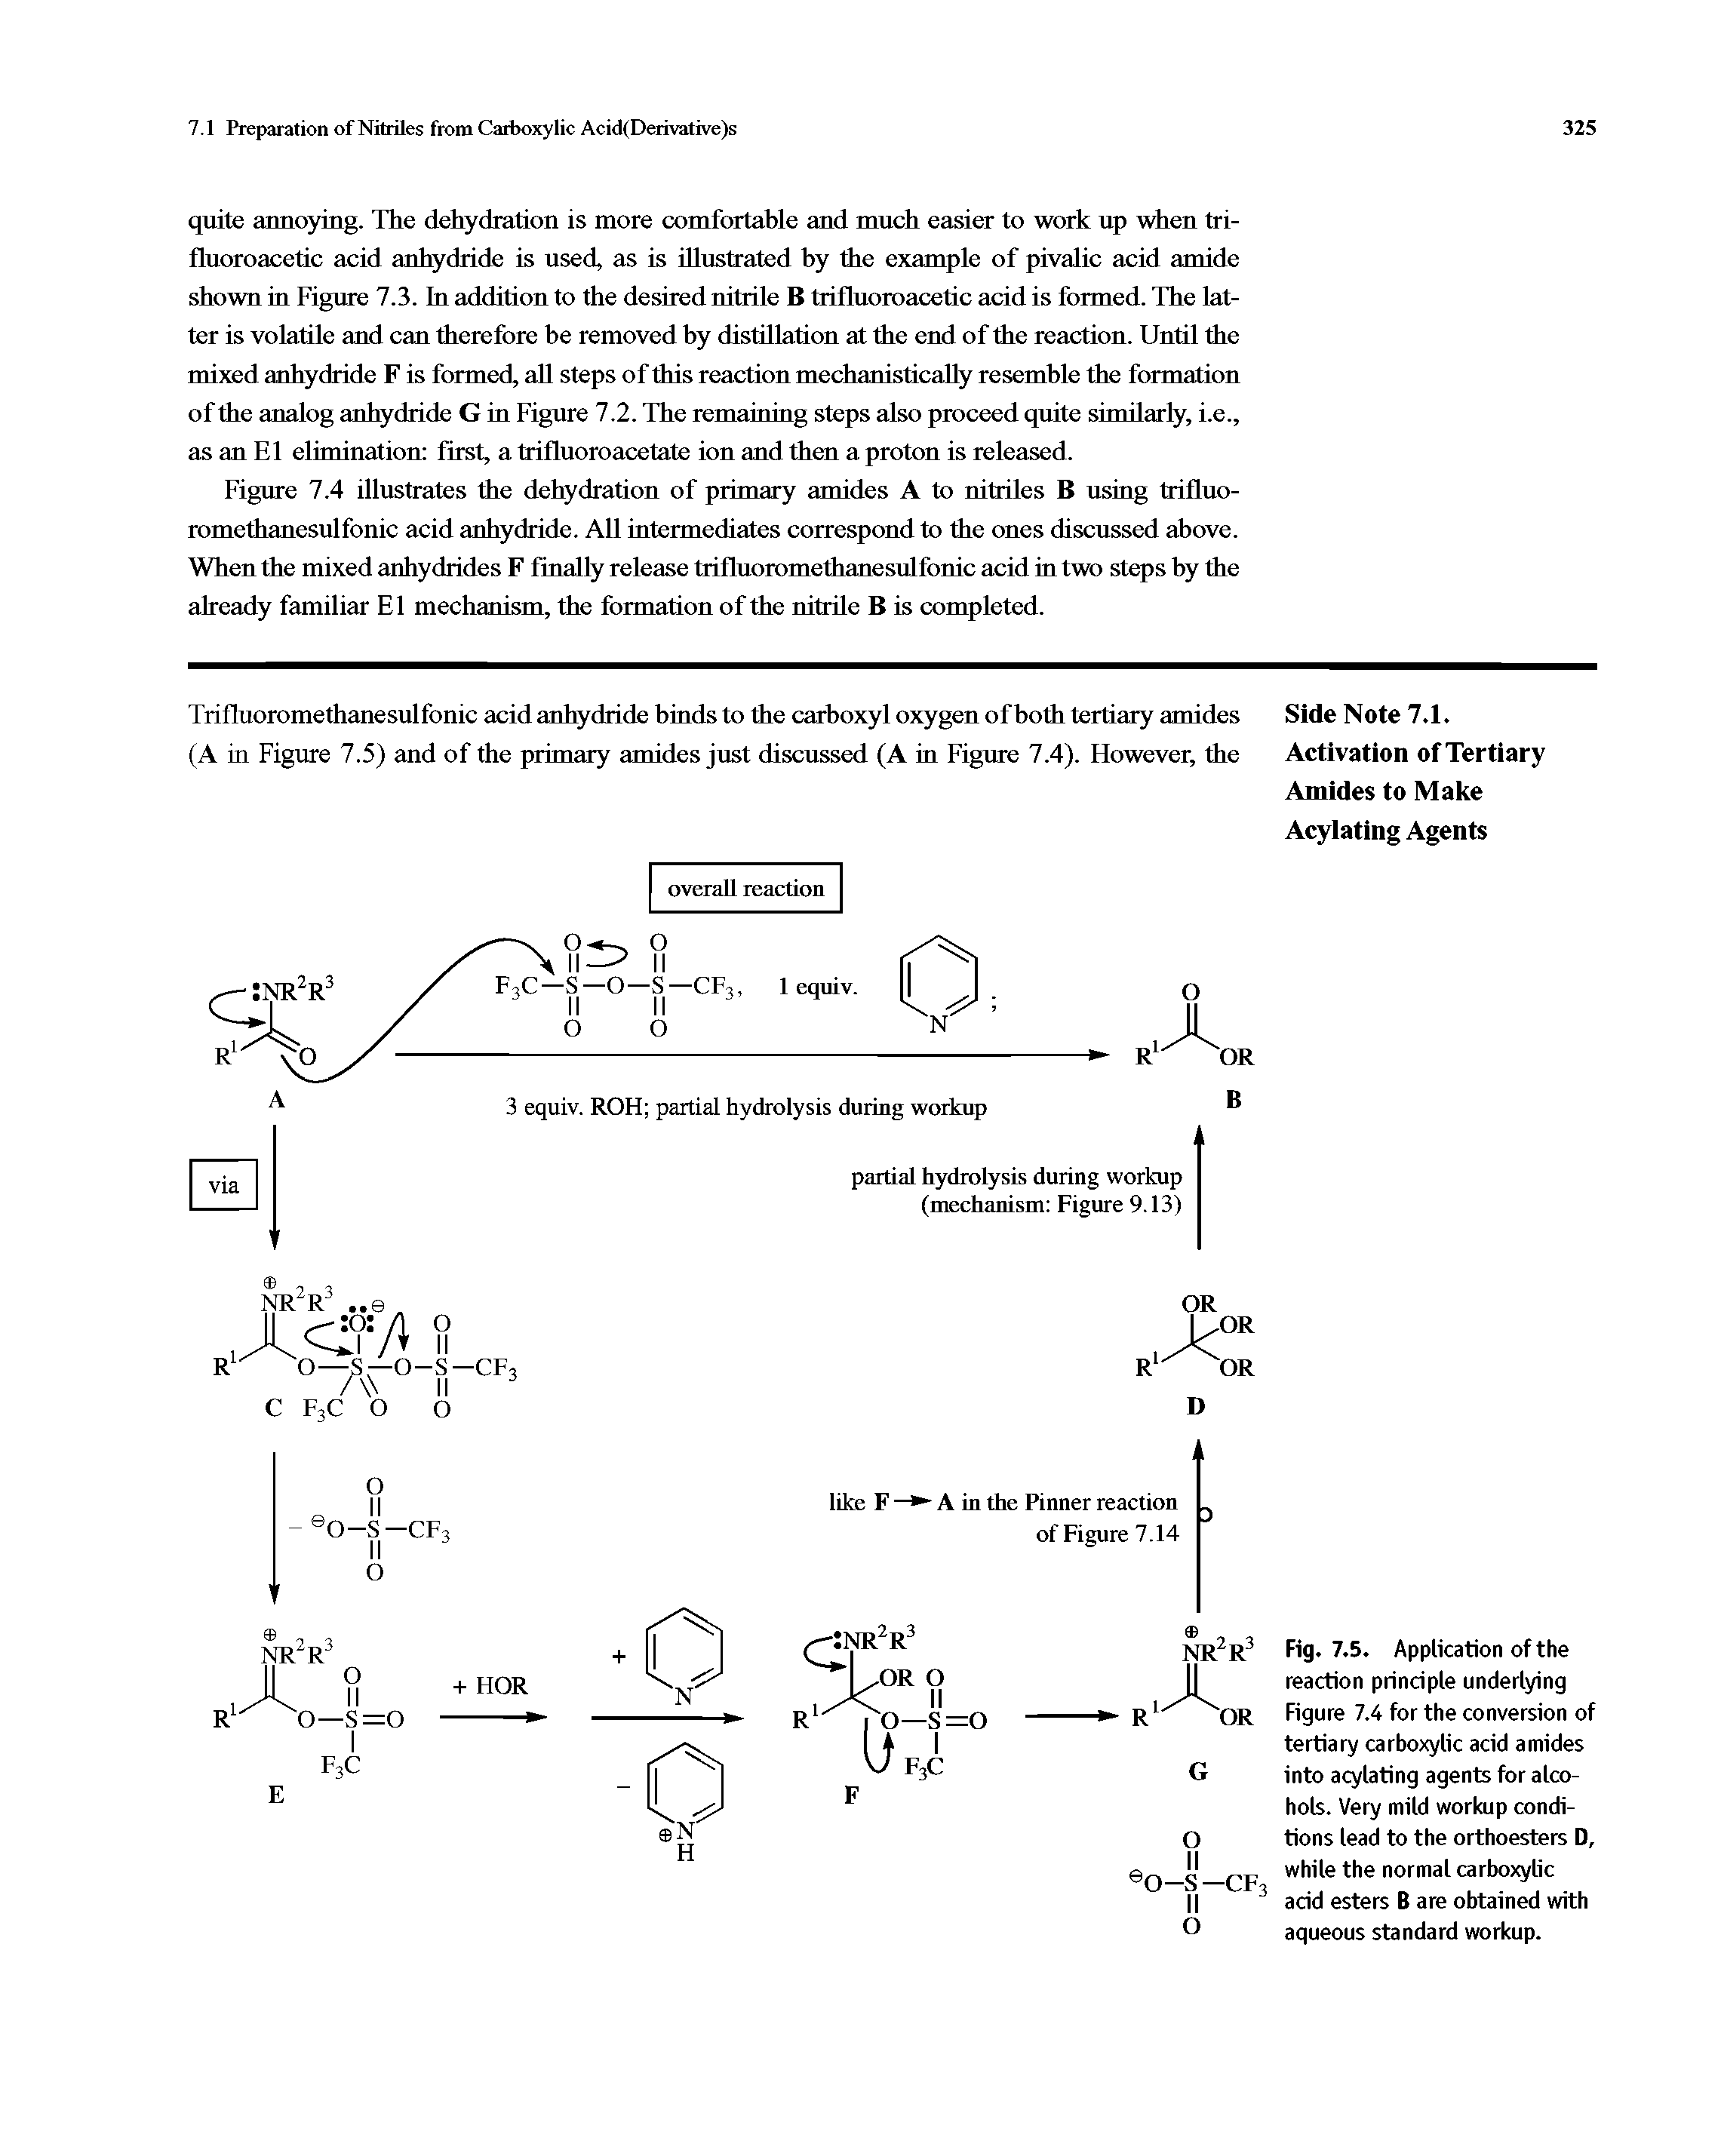 Fig. 7.5. Application of the reaction principle underlying Figure 7.4 for the conversion of tertiary carboxylic acid amides into acylating agents for alcohols. Very mild workup conditions lead to the orthoesters D, while the normal carboxylic acid esters B are obtained with aqueous standard workup.